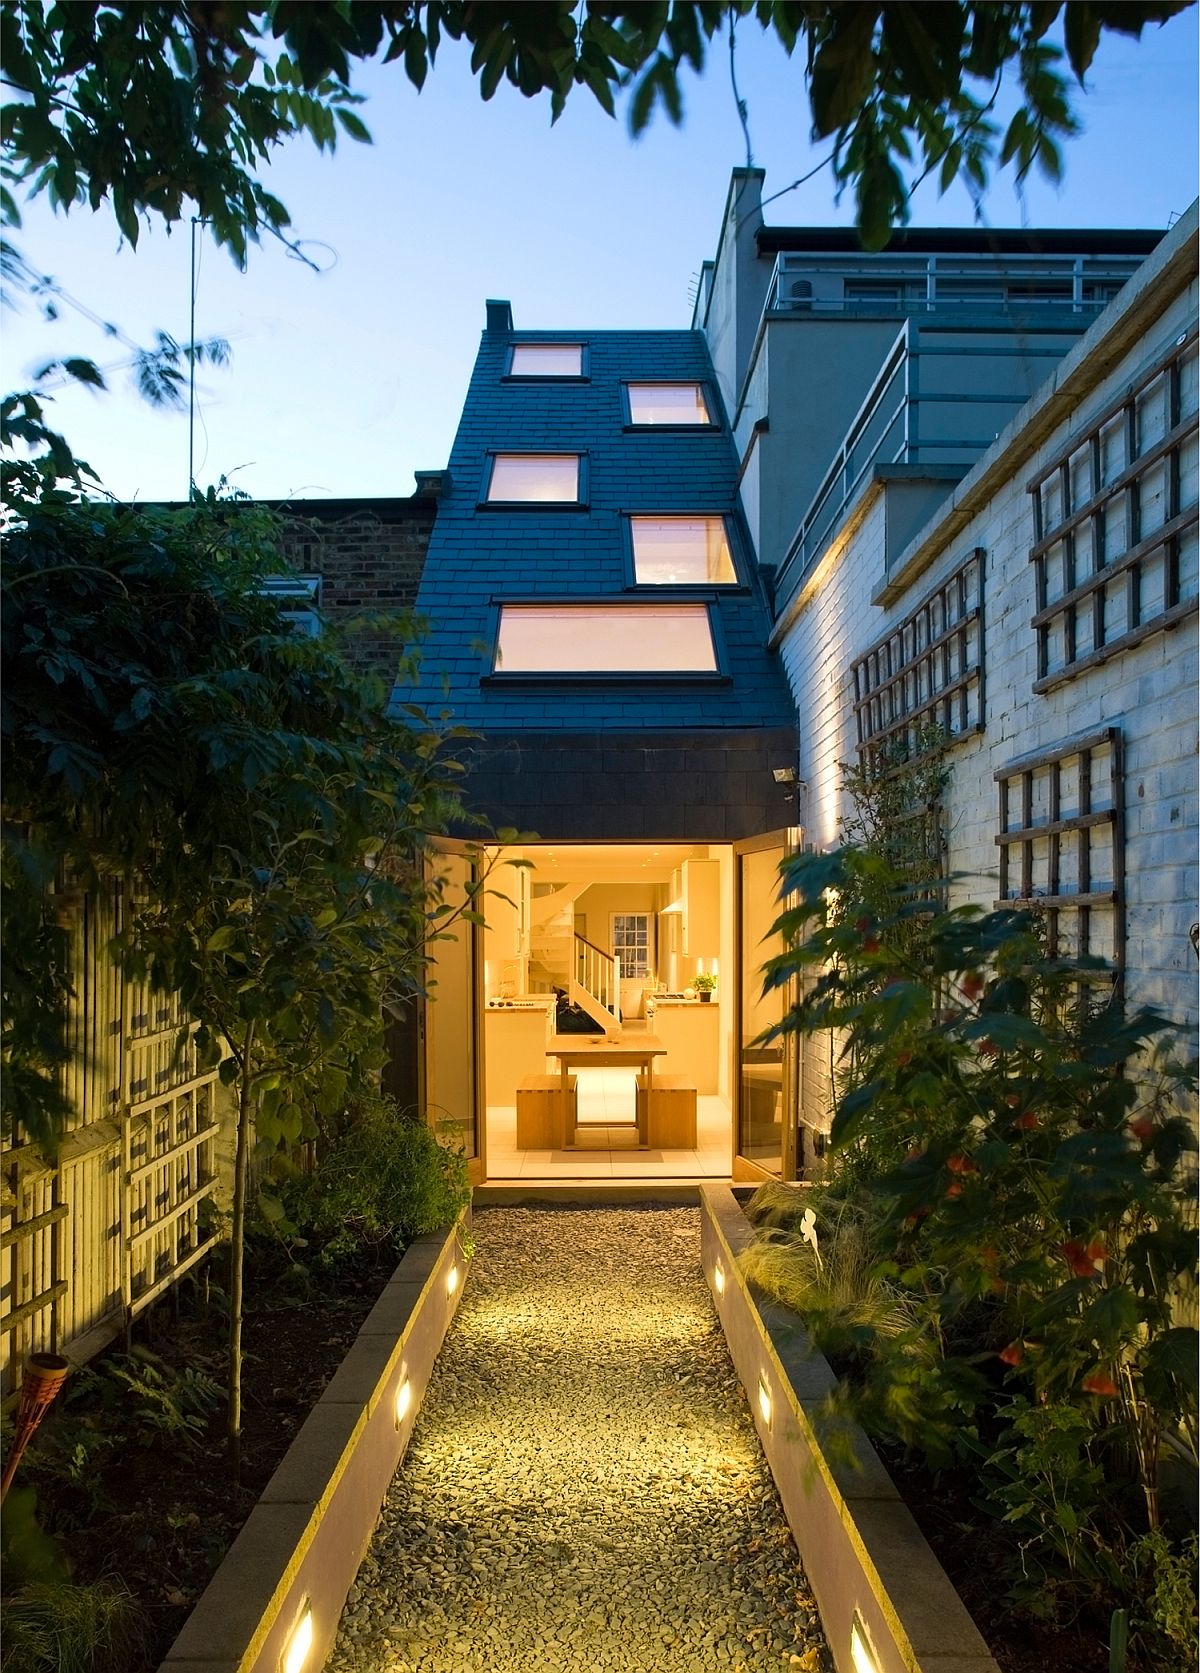 beautiful-and-innovative-home-in-london-is-one-of-the-slimmest-on-the-planet-18278-16013550367231153140928.jpg